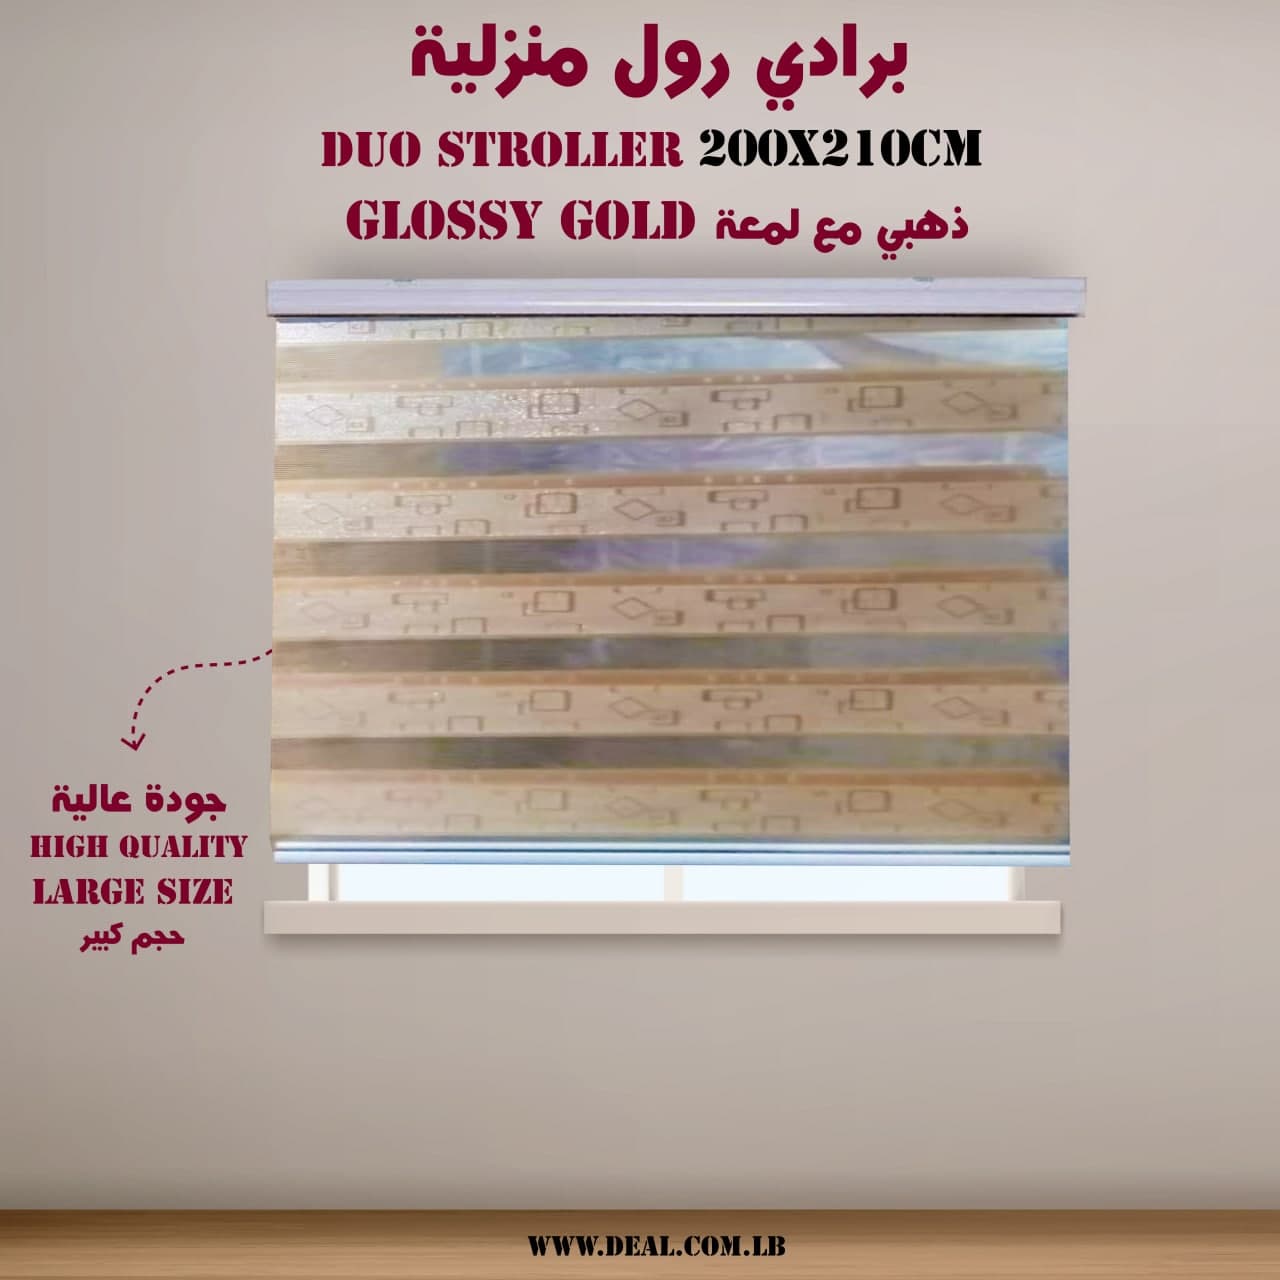 Glossy Gold Duo Curtain With Shapes Designs 200x210